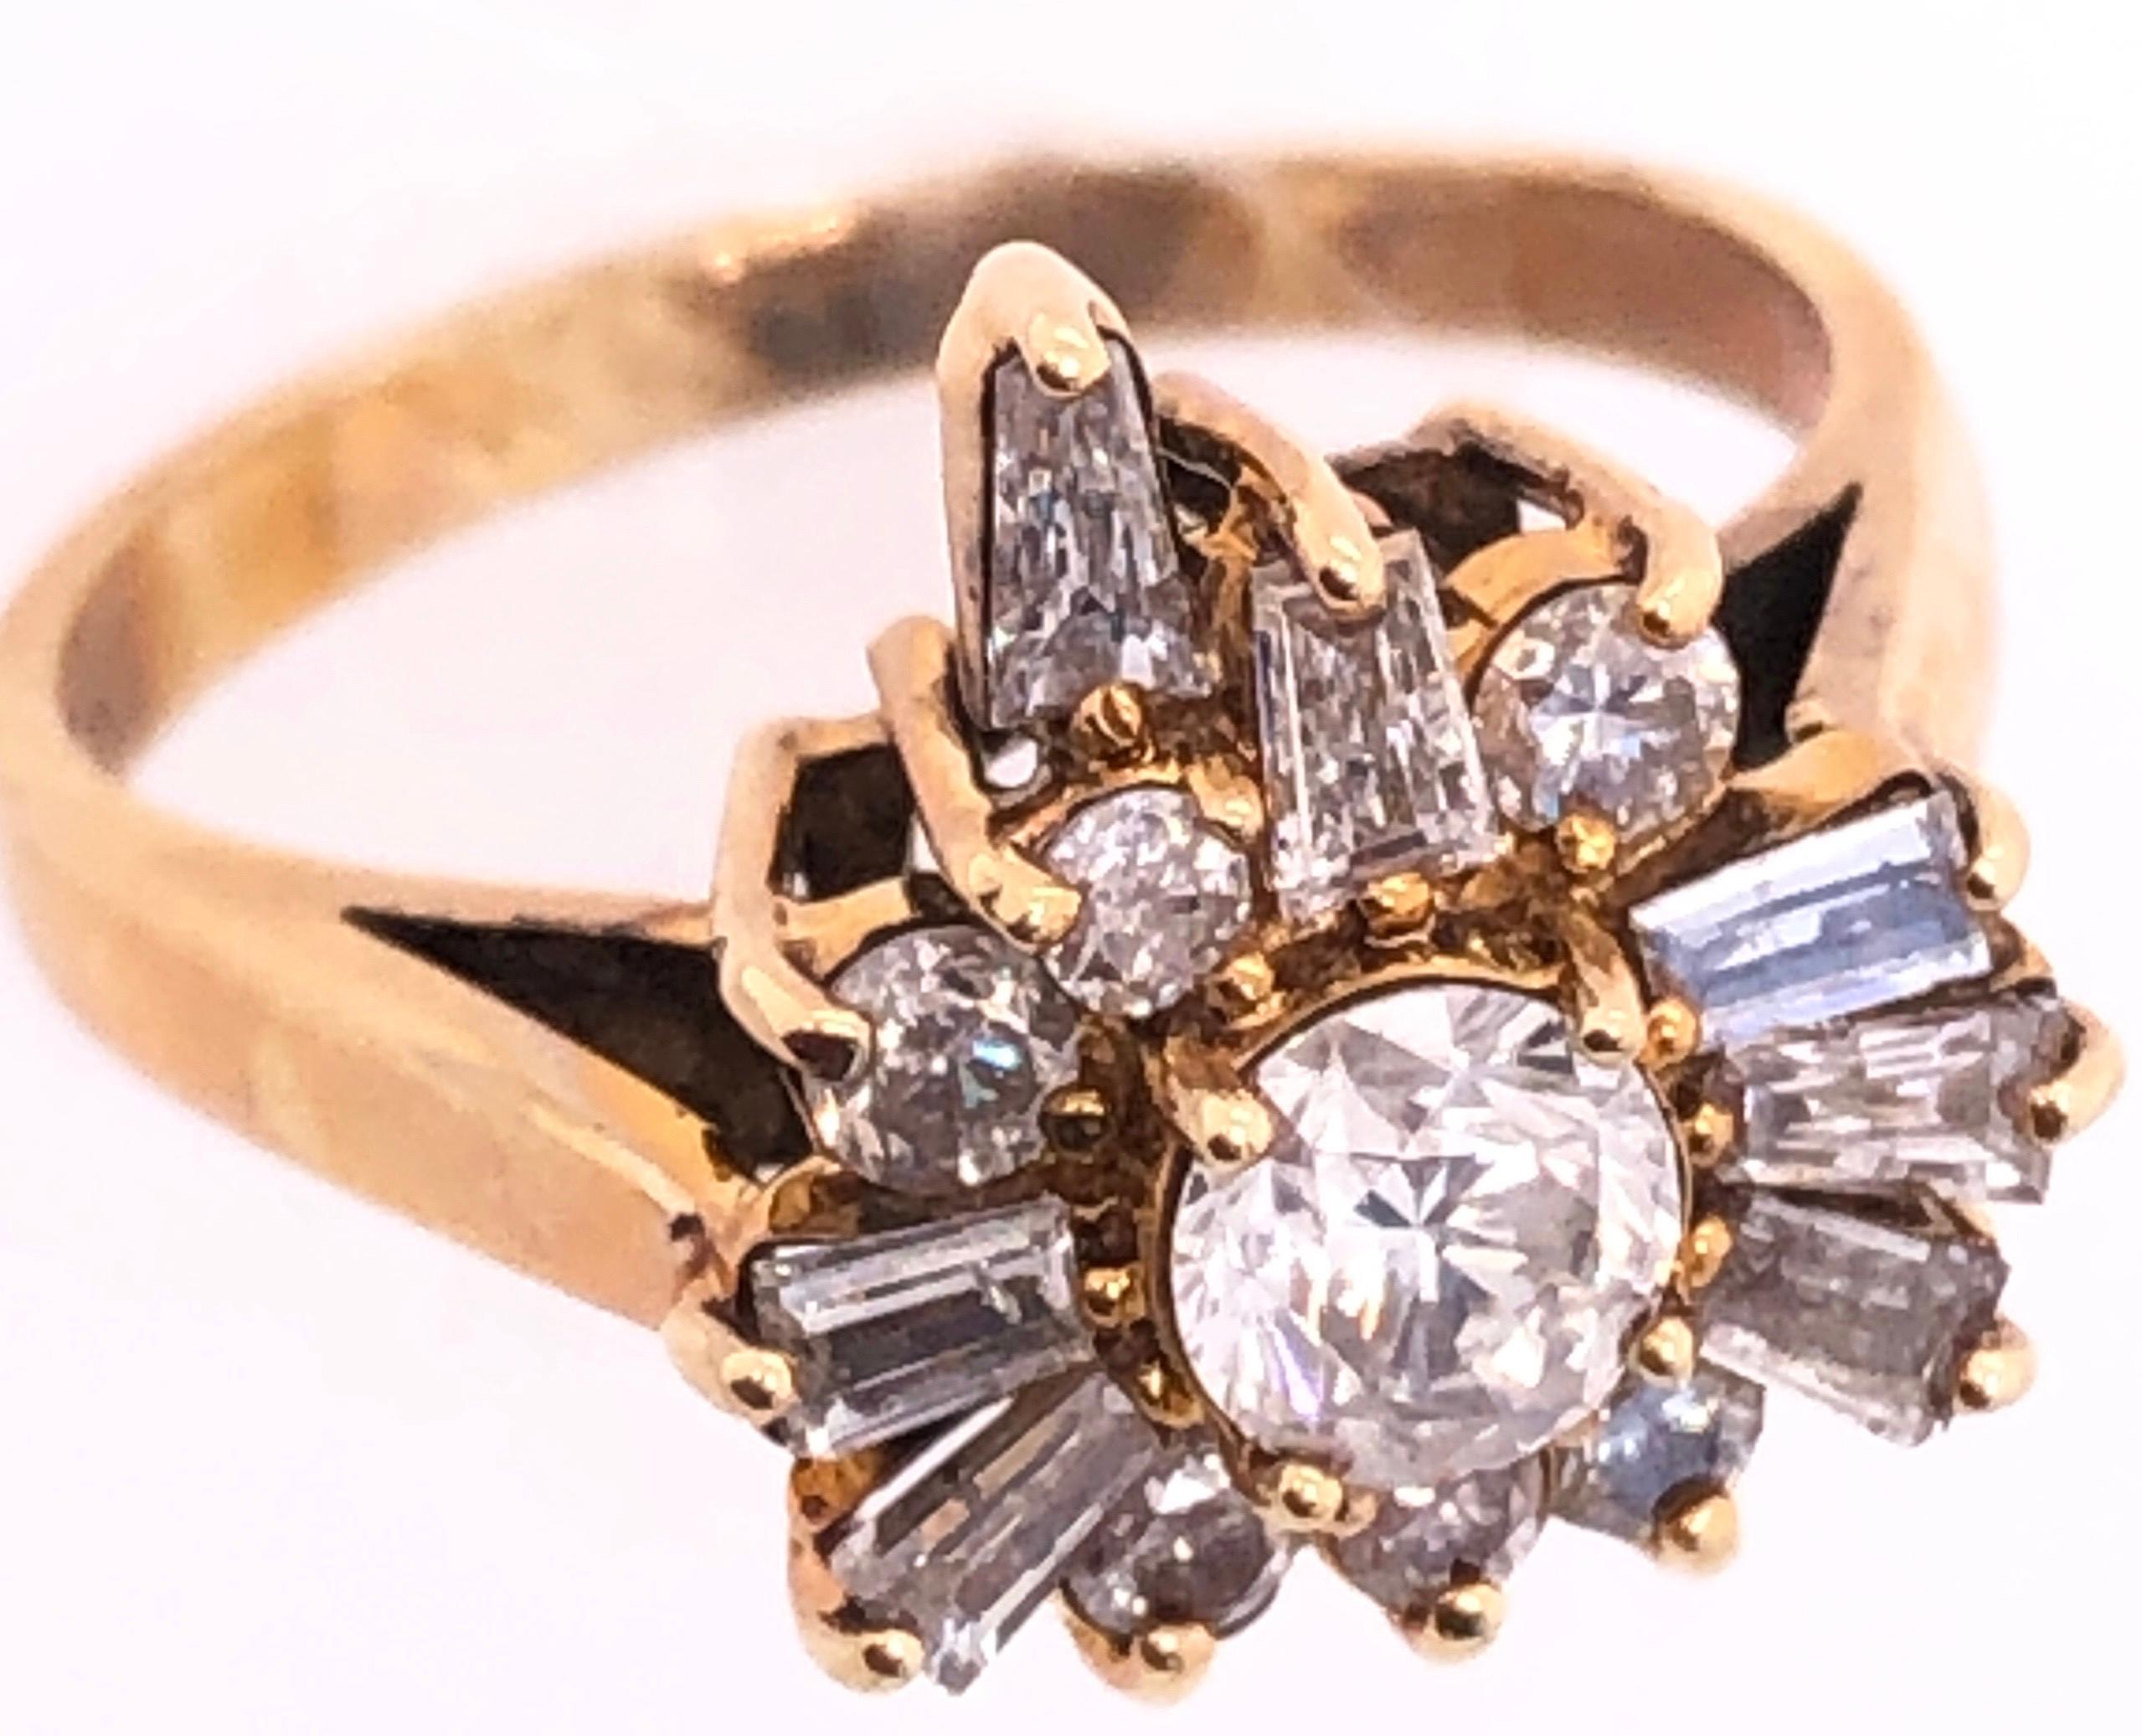 14 Karat Yellow Gold Fashion Ring with Diamonds.
1.00 total diamond weight.
Size 7.25
4 grams total weight.